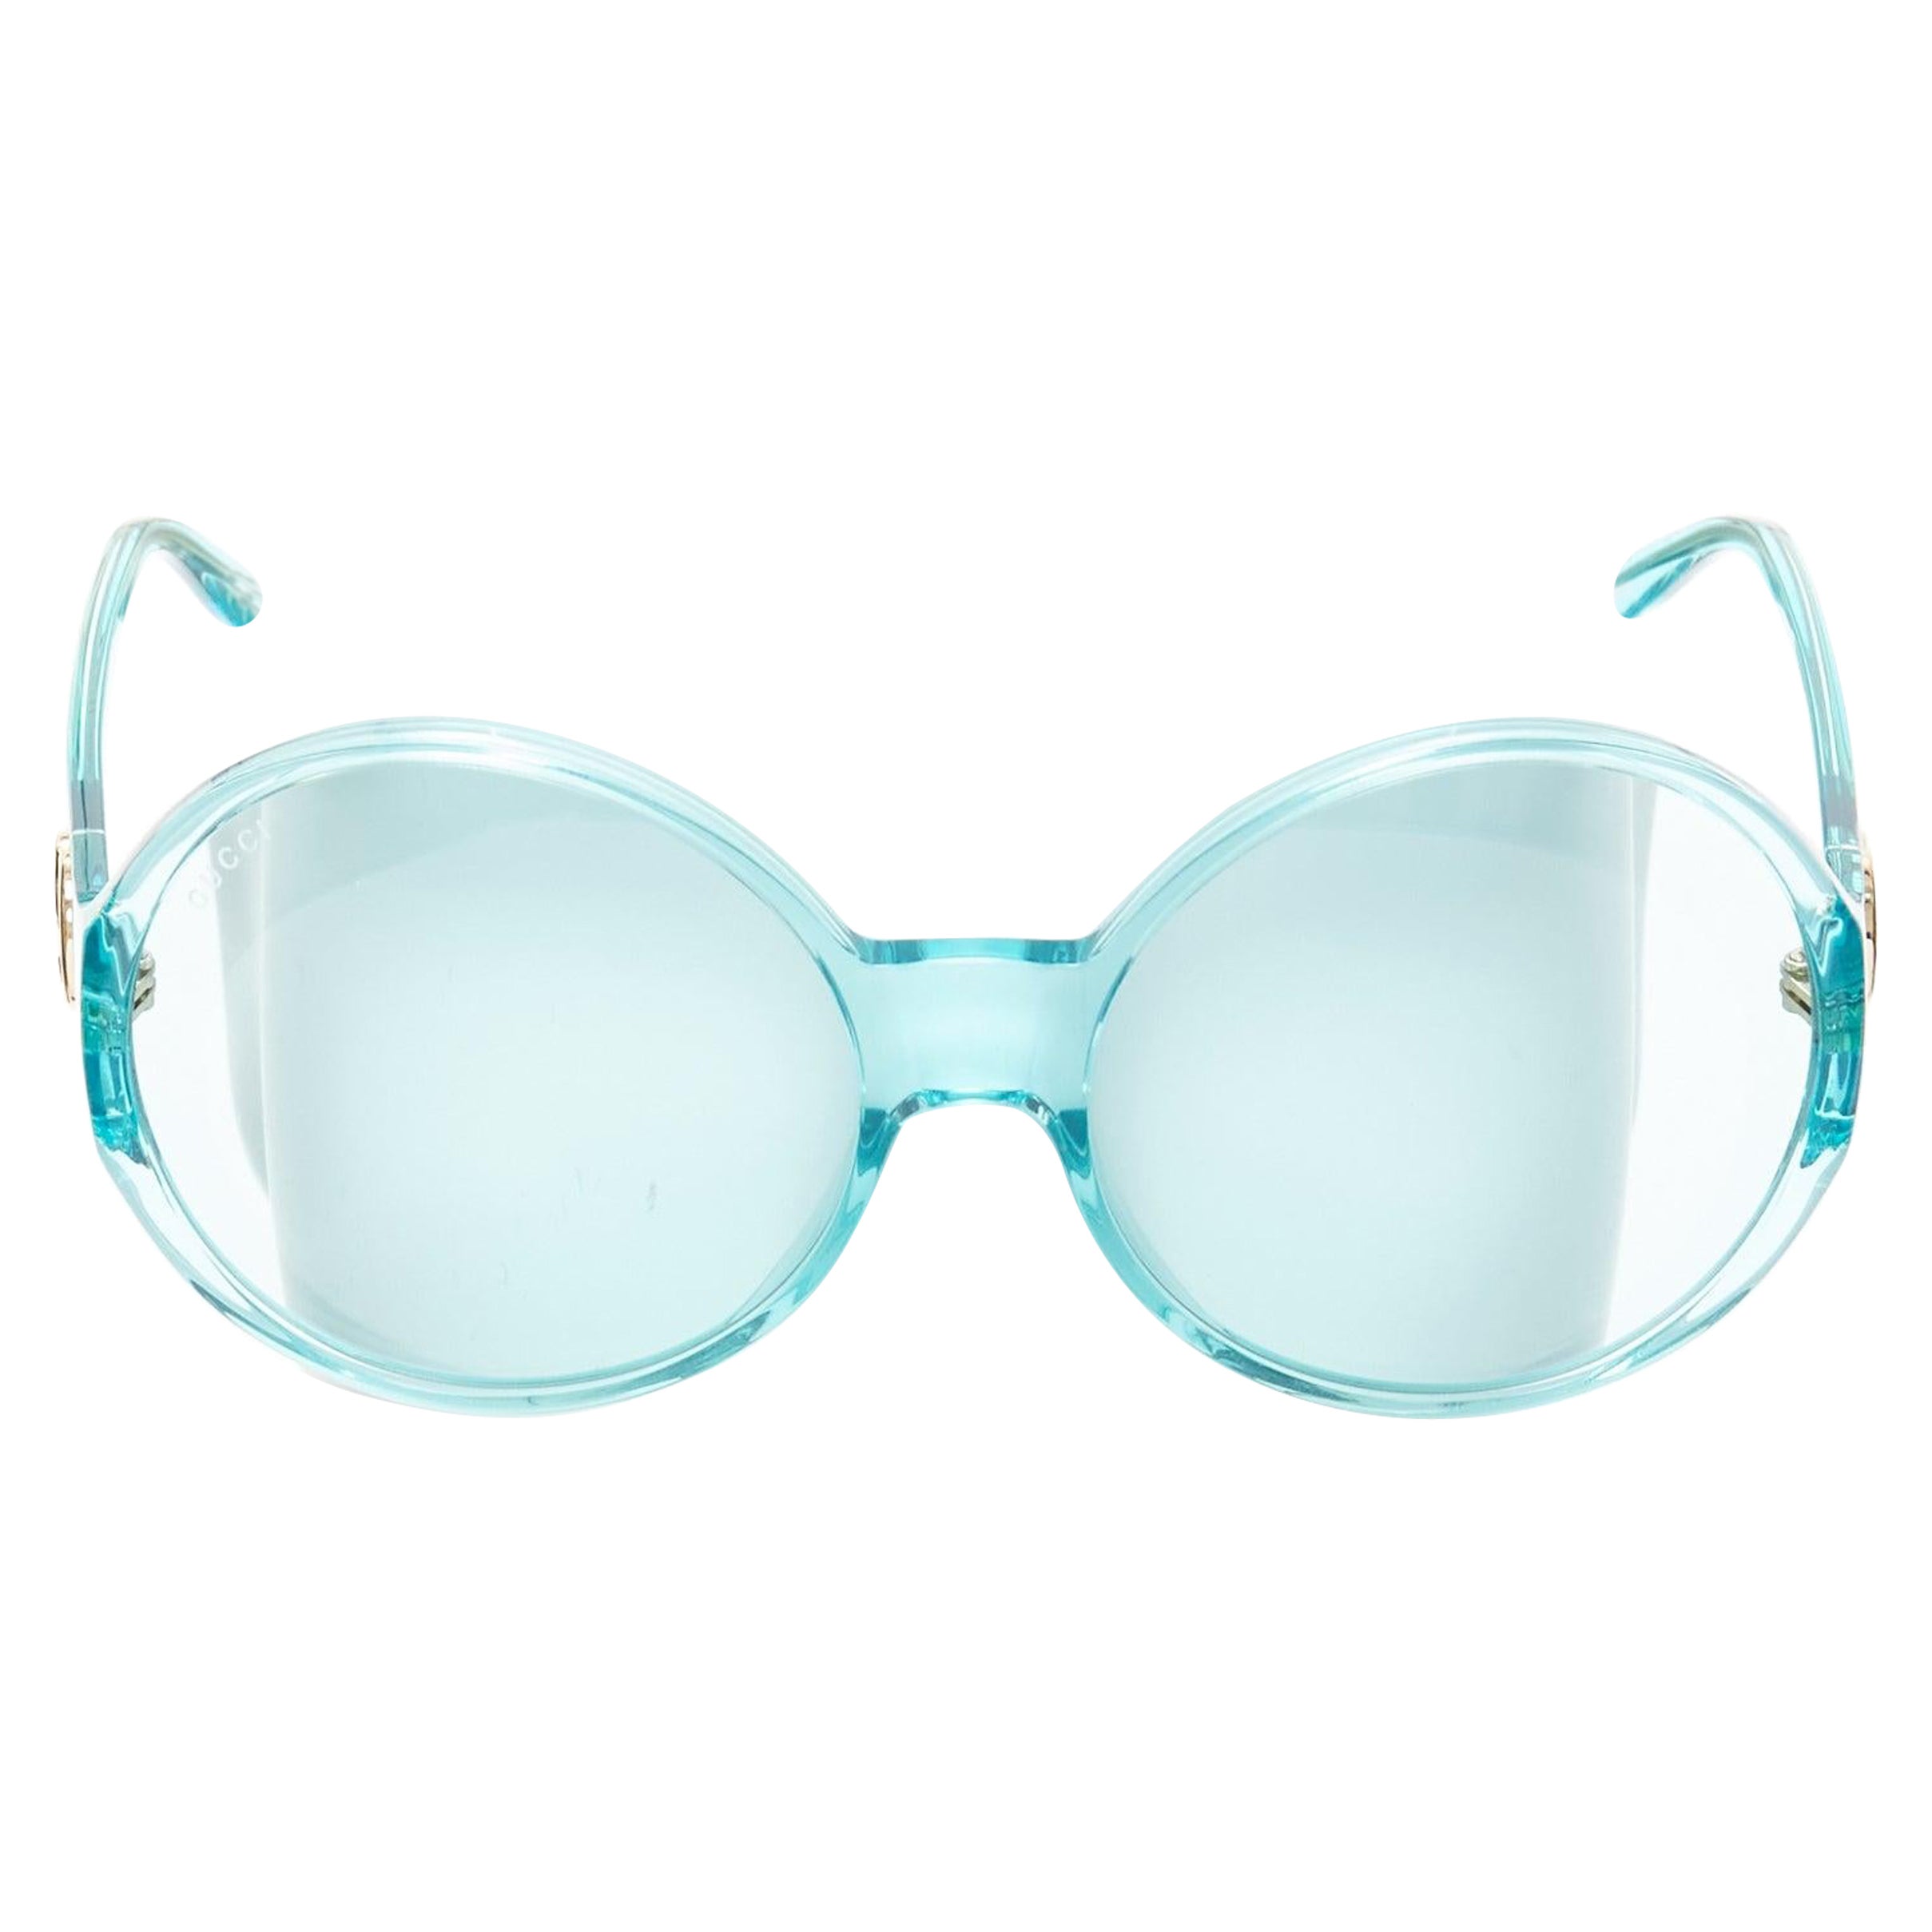 GUCCI Alessandro Michele GG0954S blue hue round frame oversized sunnies For Sale